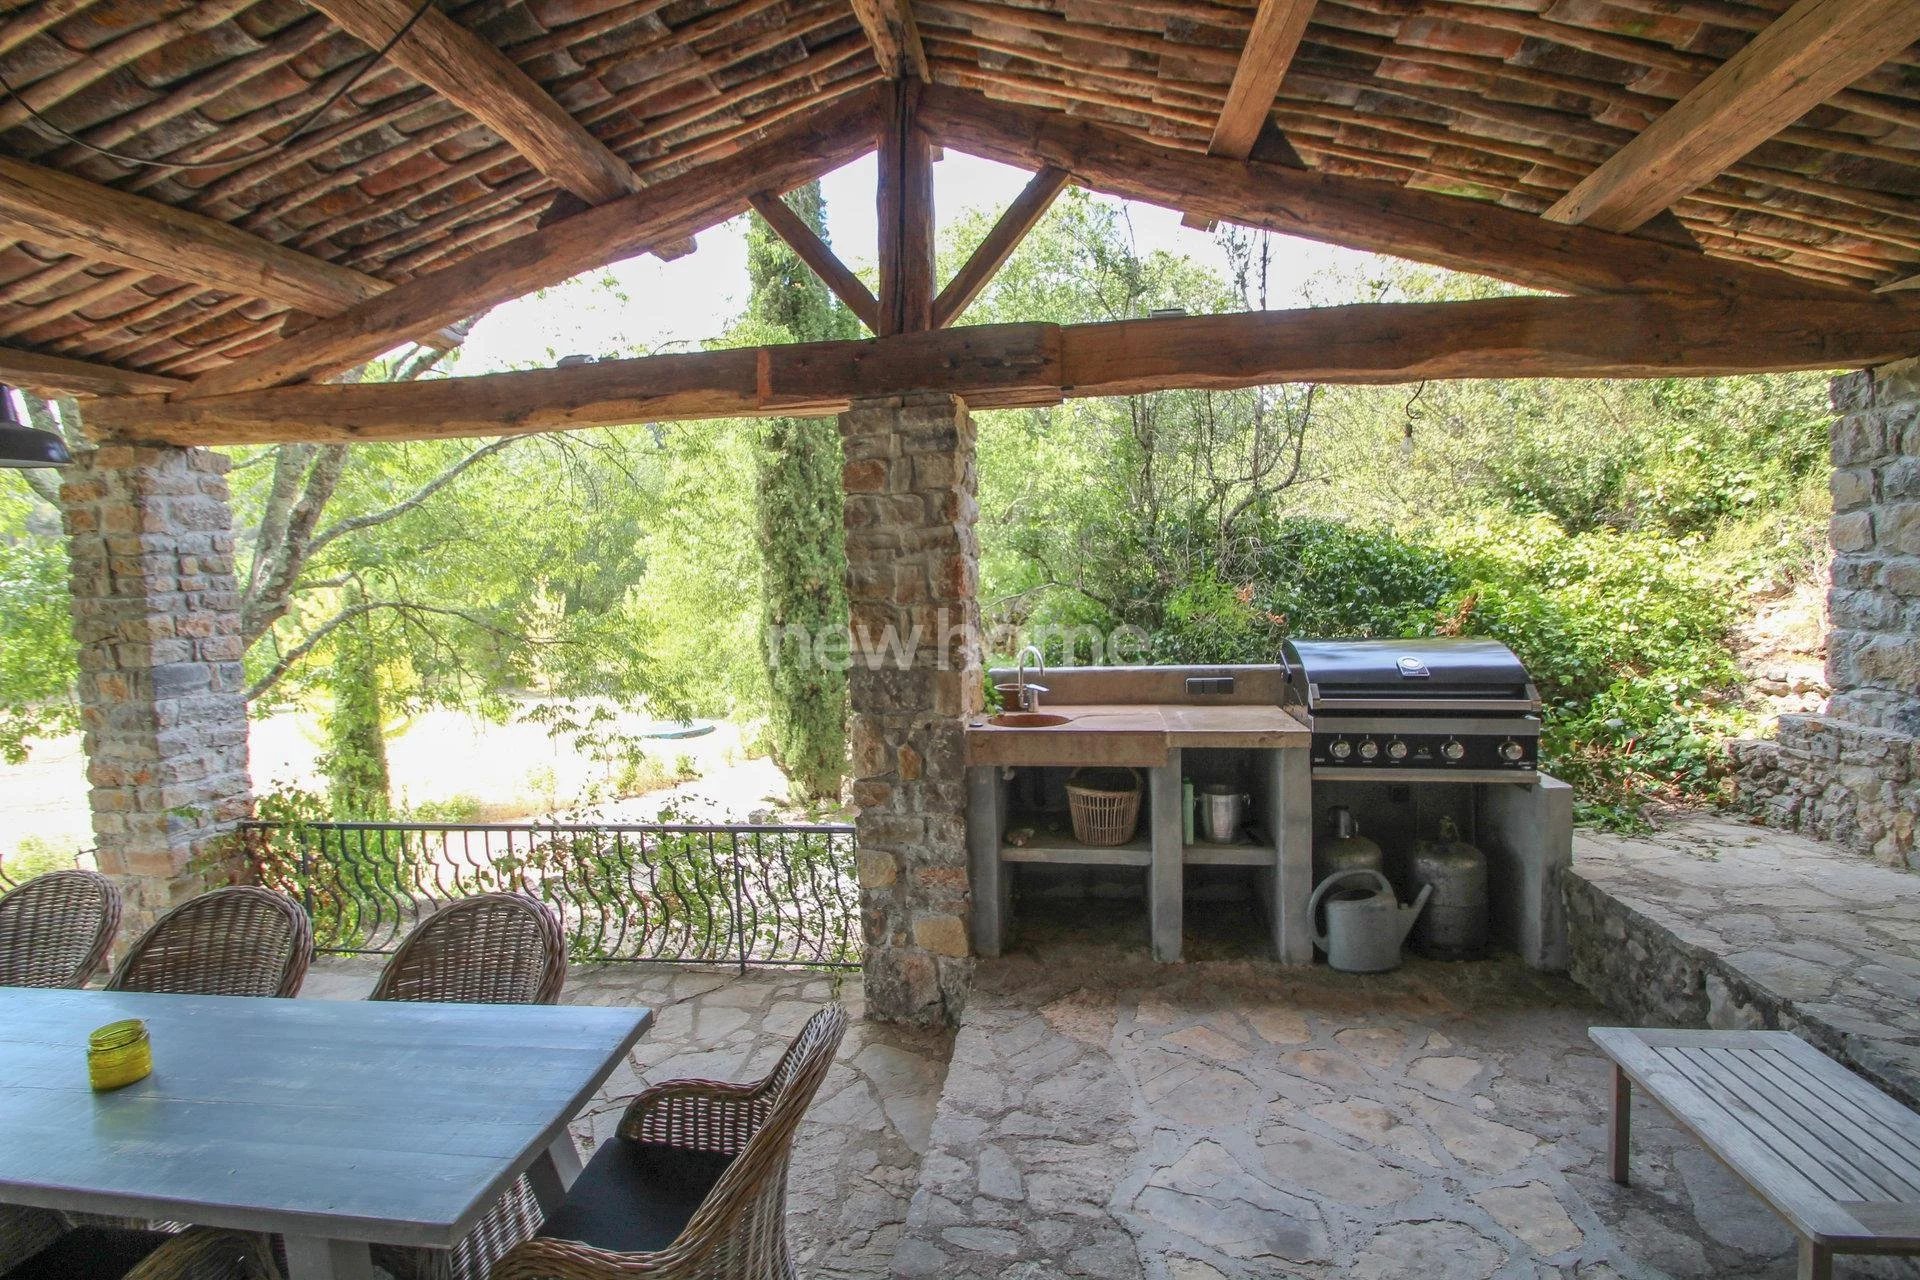 Charming natural stone build property on 4,2 hectare land